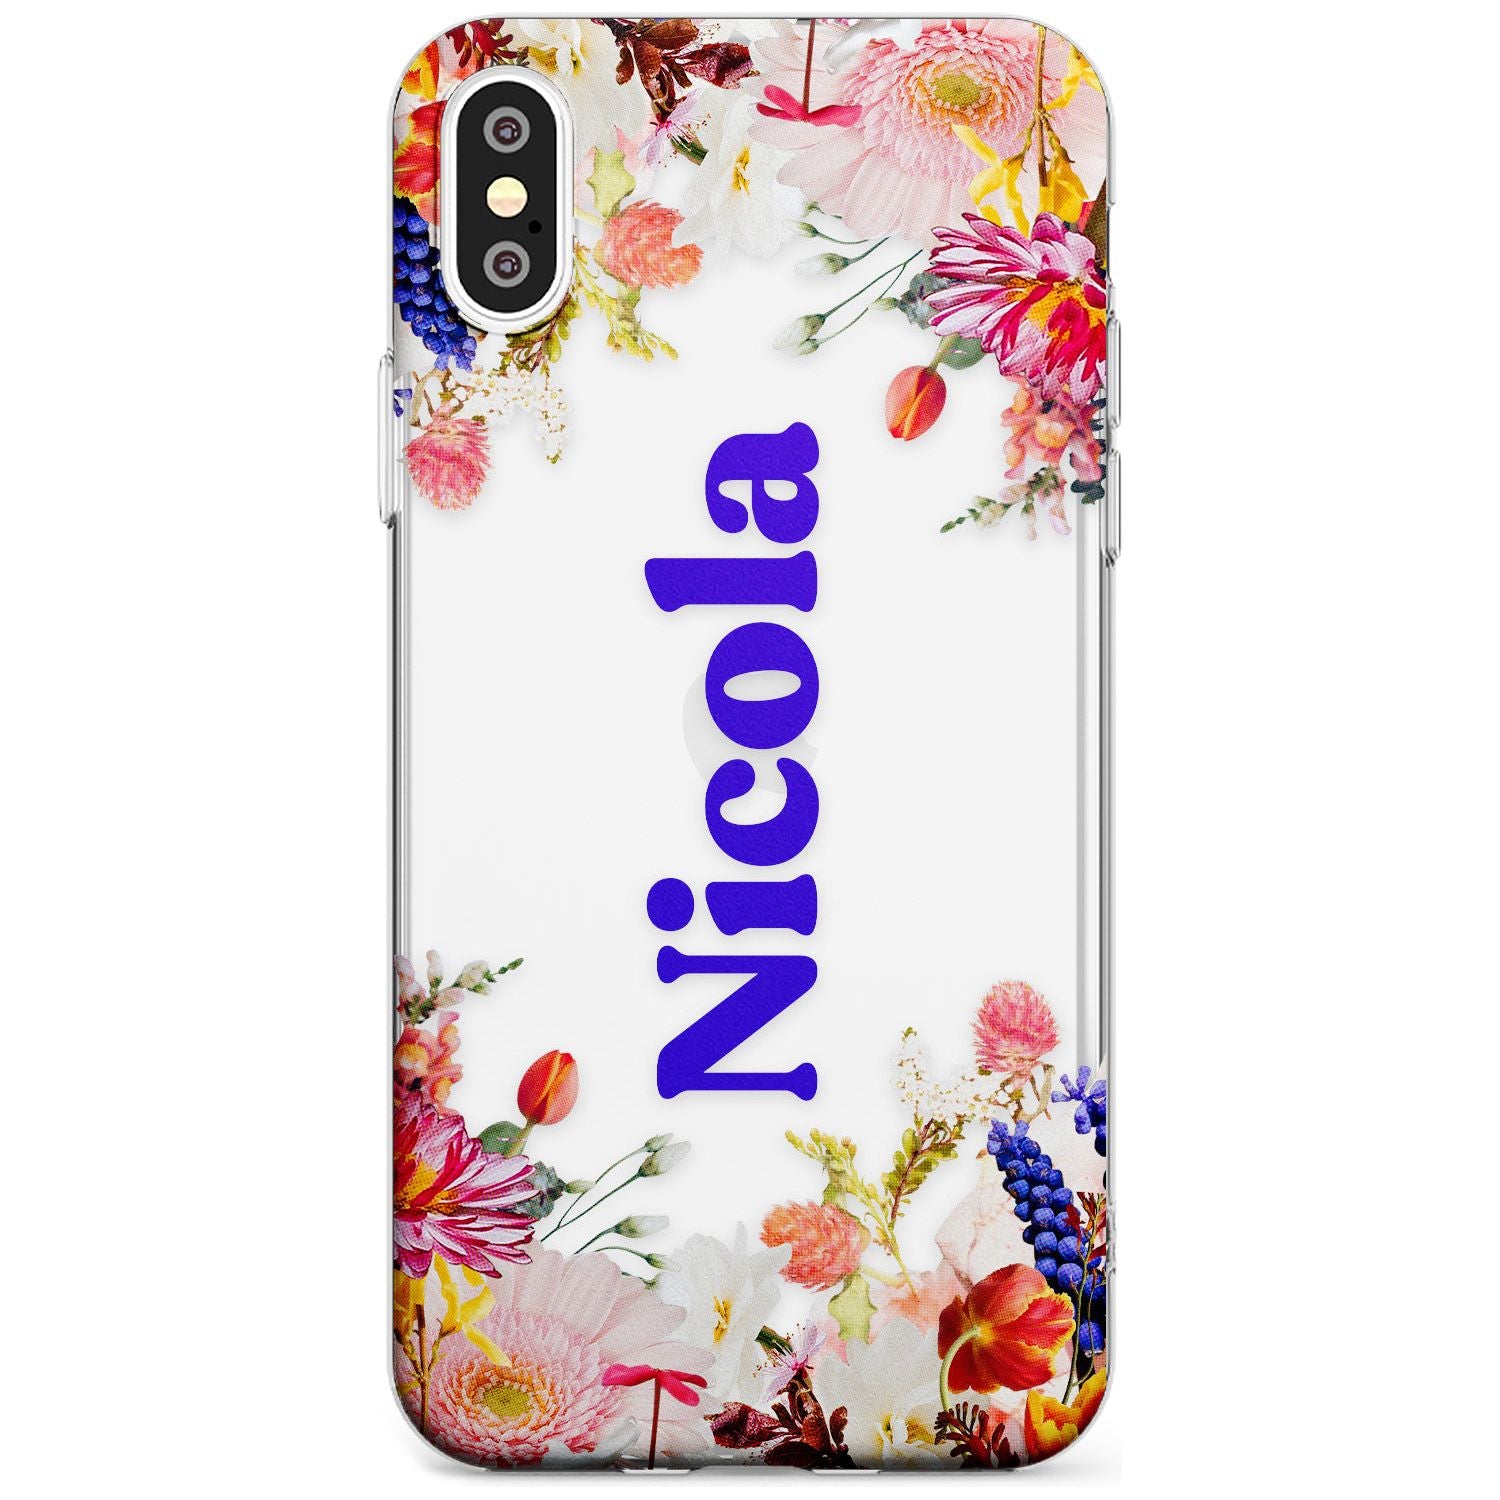 Custom Text with Floral Borders Black Impact Phone Case for iPhone X XS Max XR